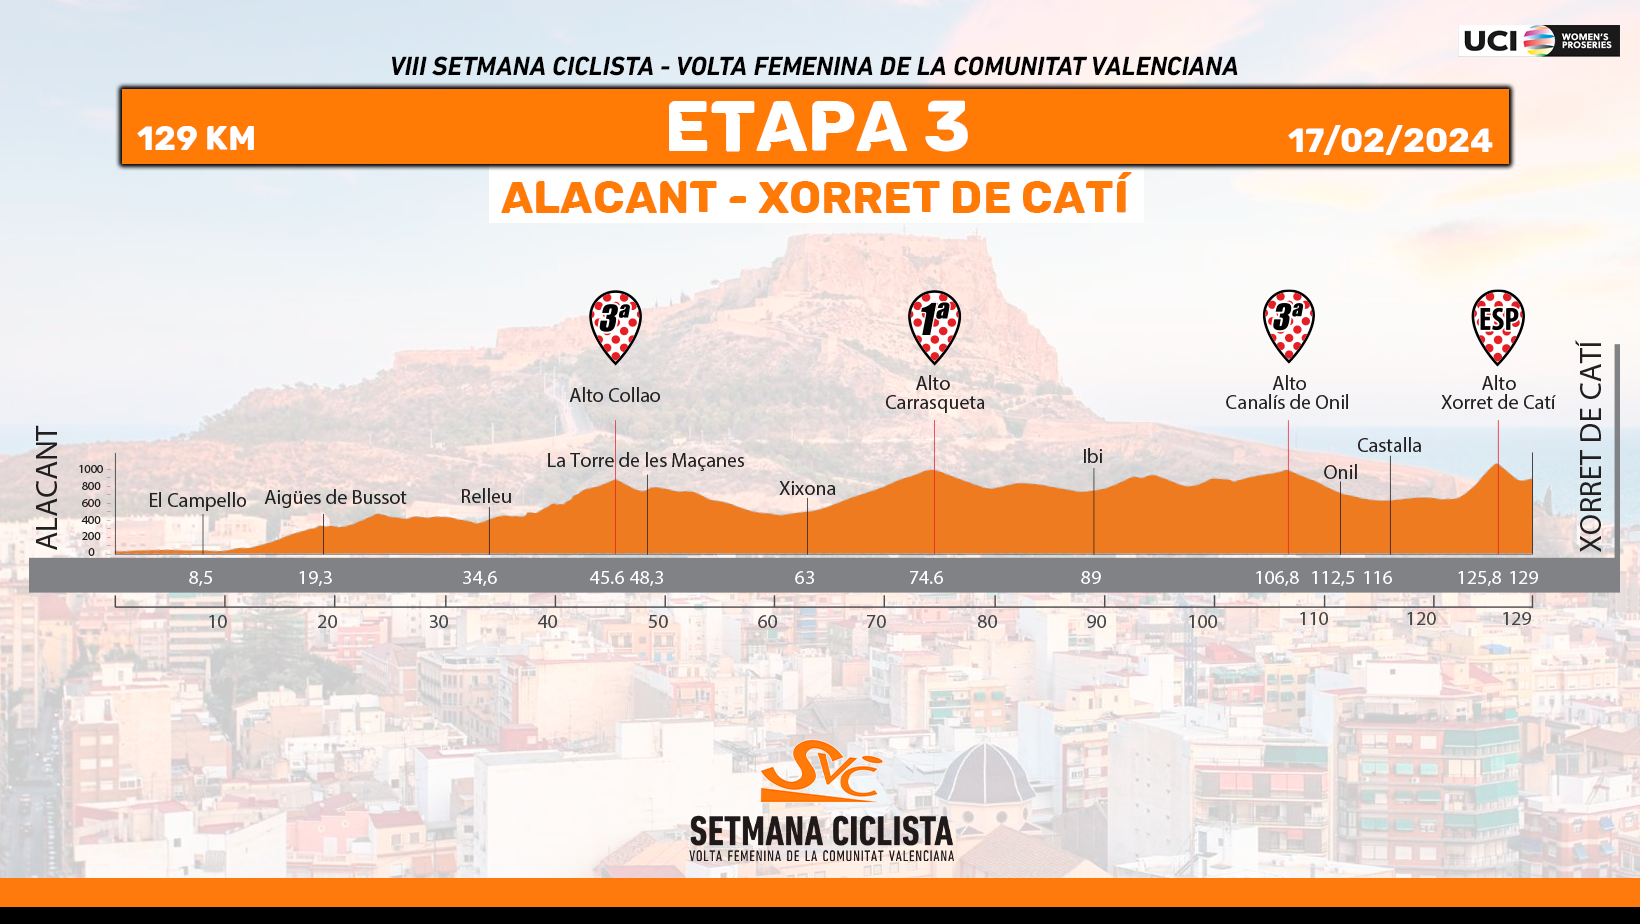 Stage 3 Setmana Ciclista profile, with the notable point of one small climb just before the finish.